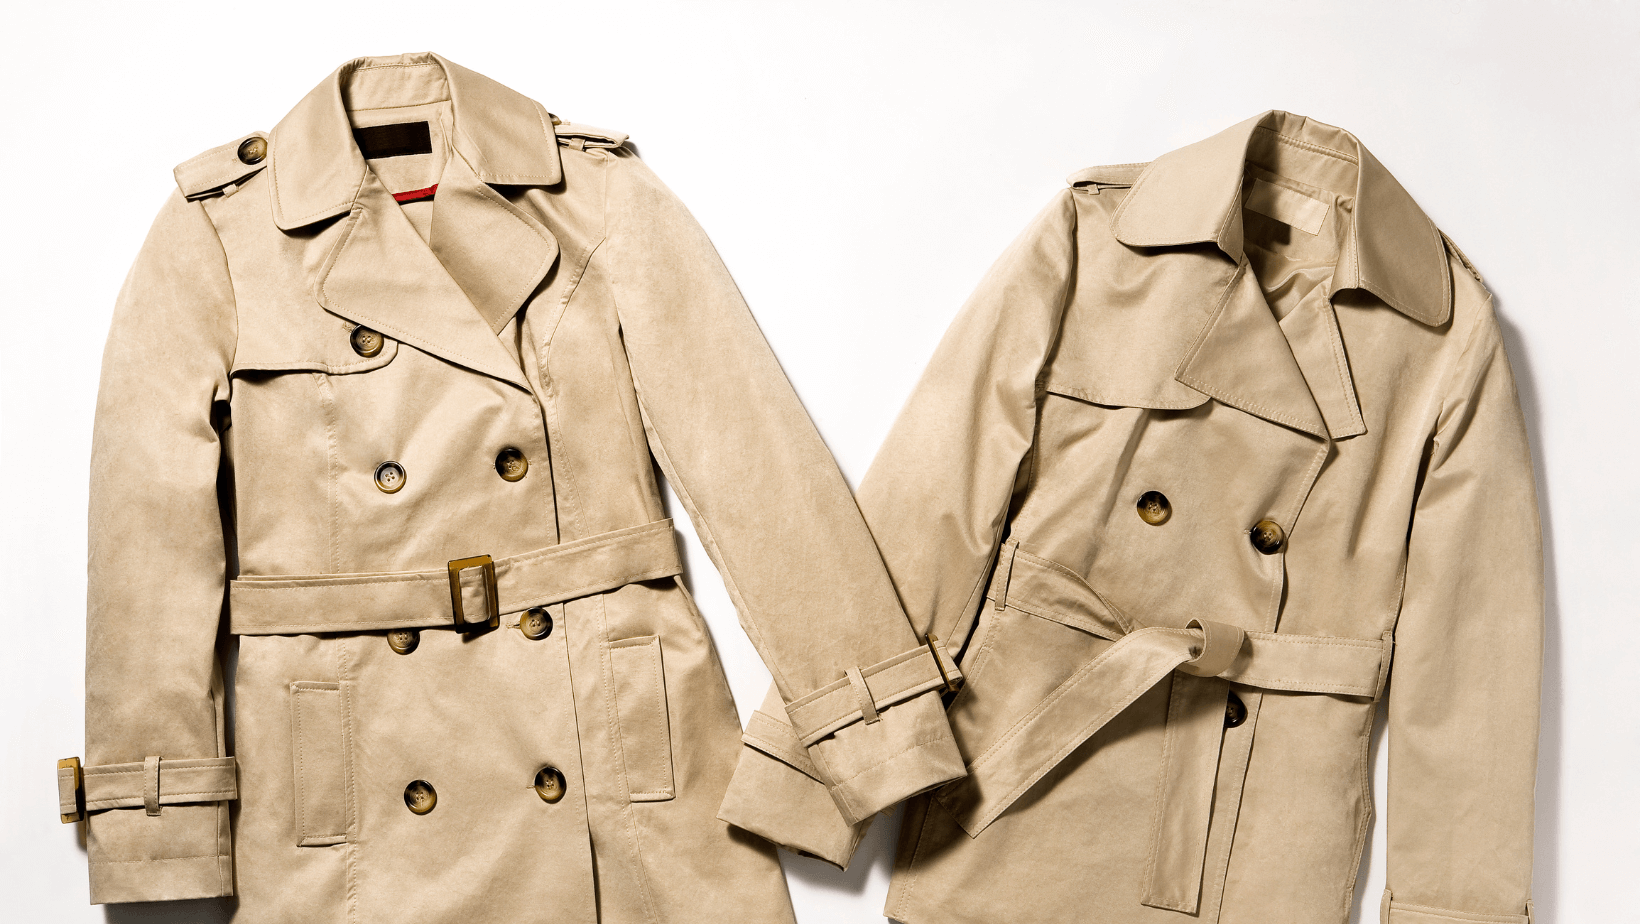 Developing The Trench Coat